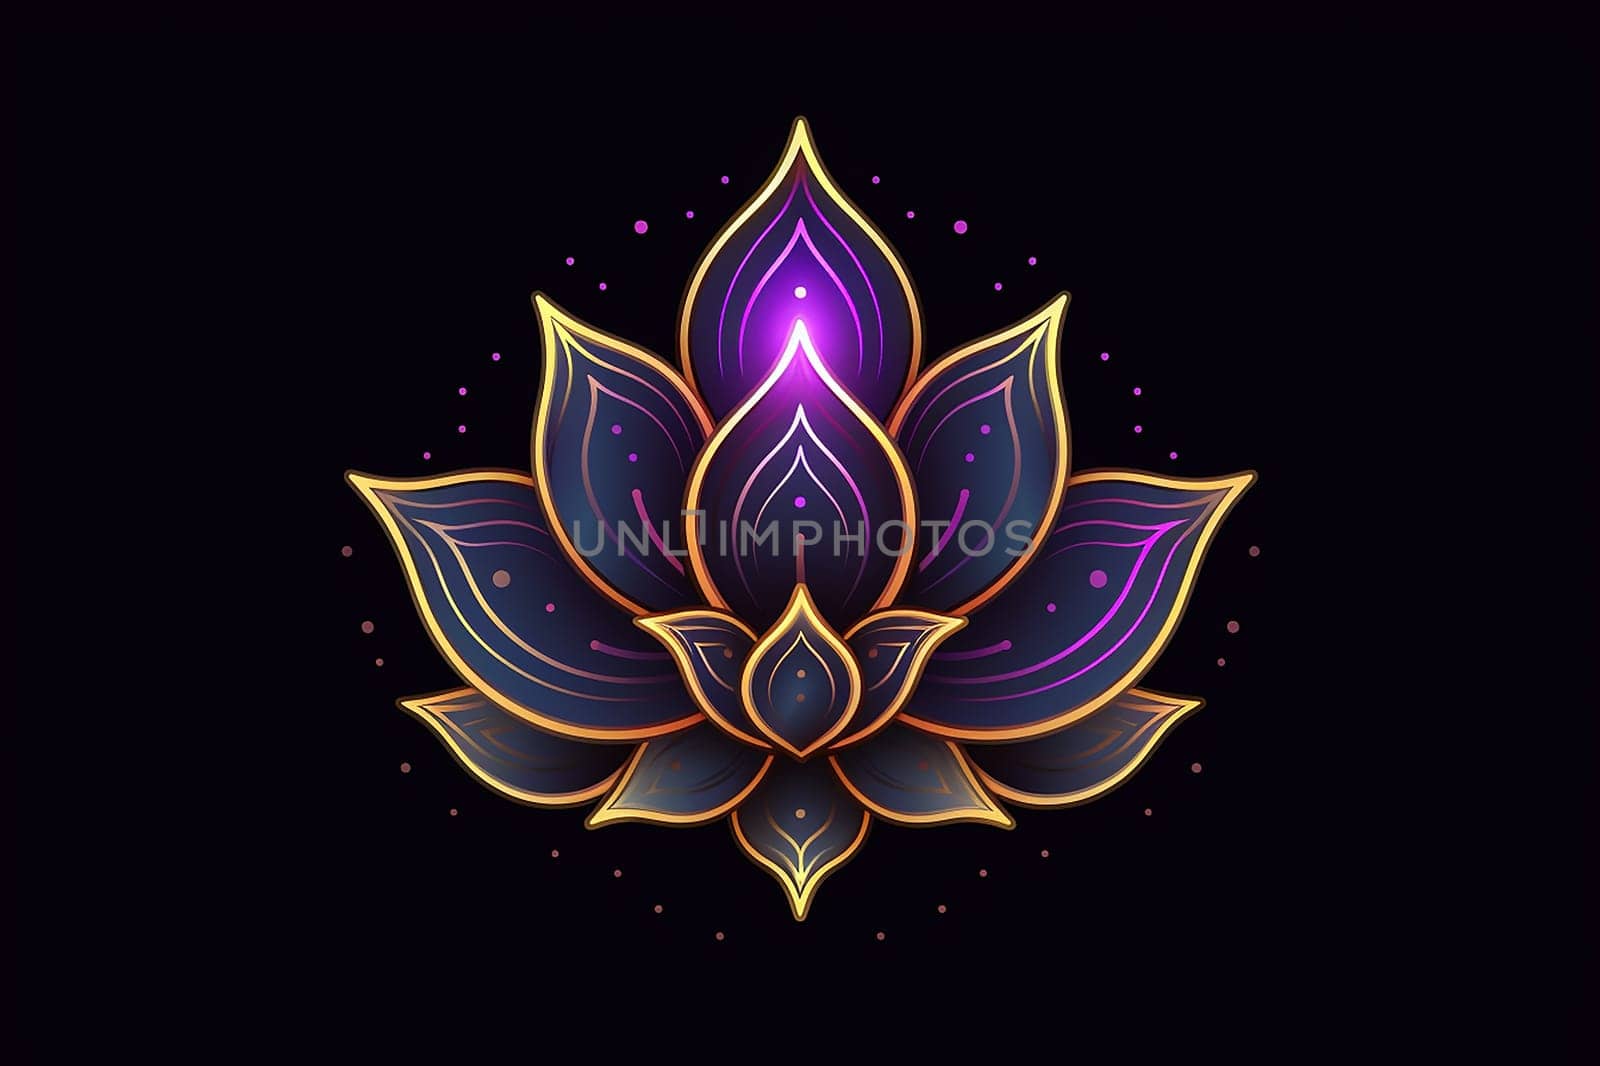 Stylized lotus illustration with vibrant colors and neon outline on dark background by Hype2art